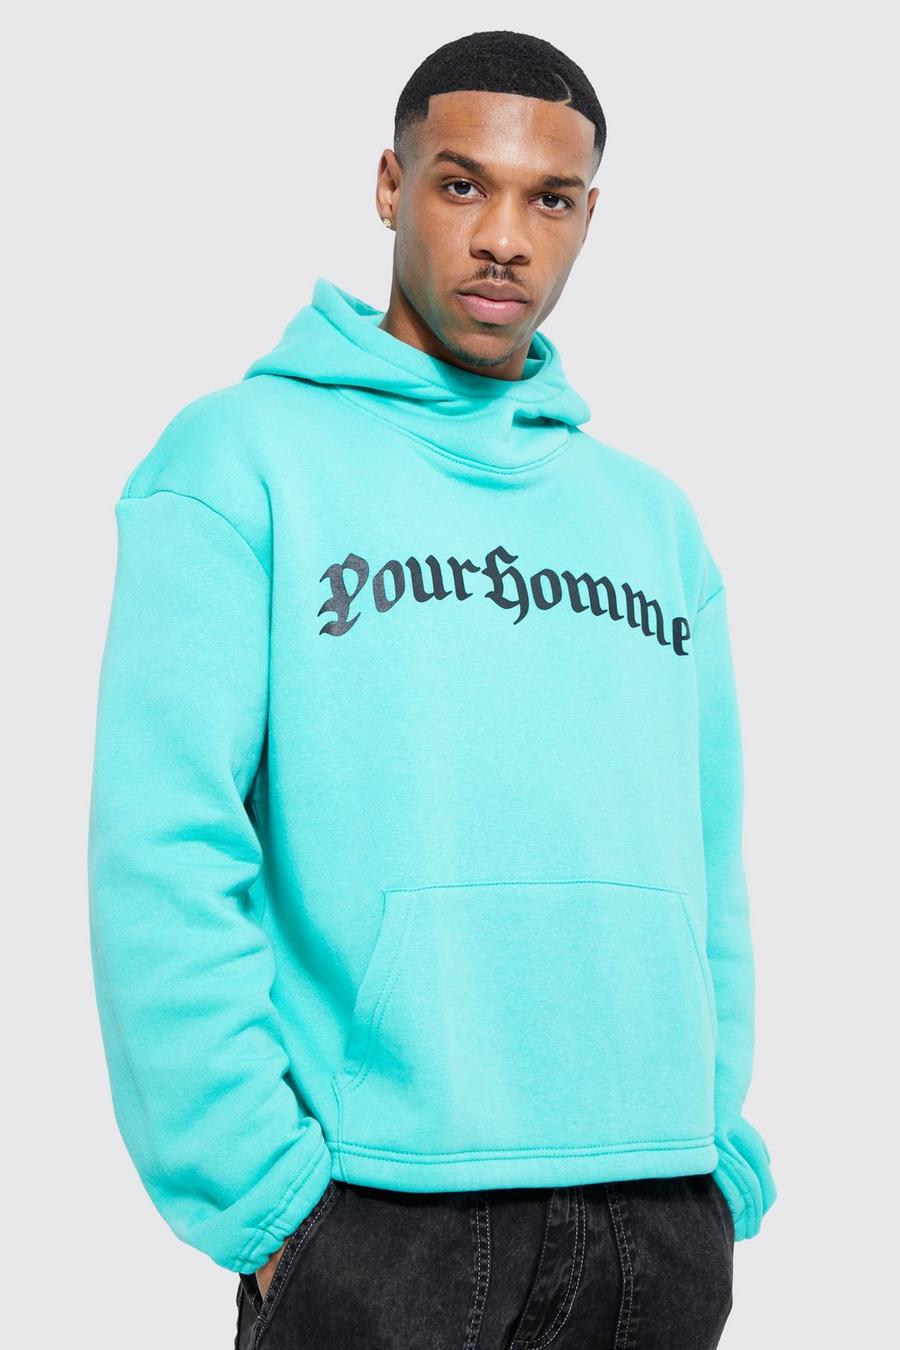 Boxy Oversized Bungee Hem Official Hoodie, Teal green